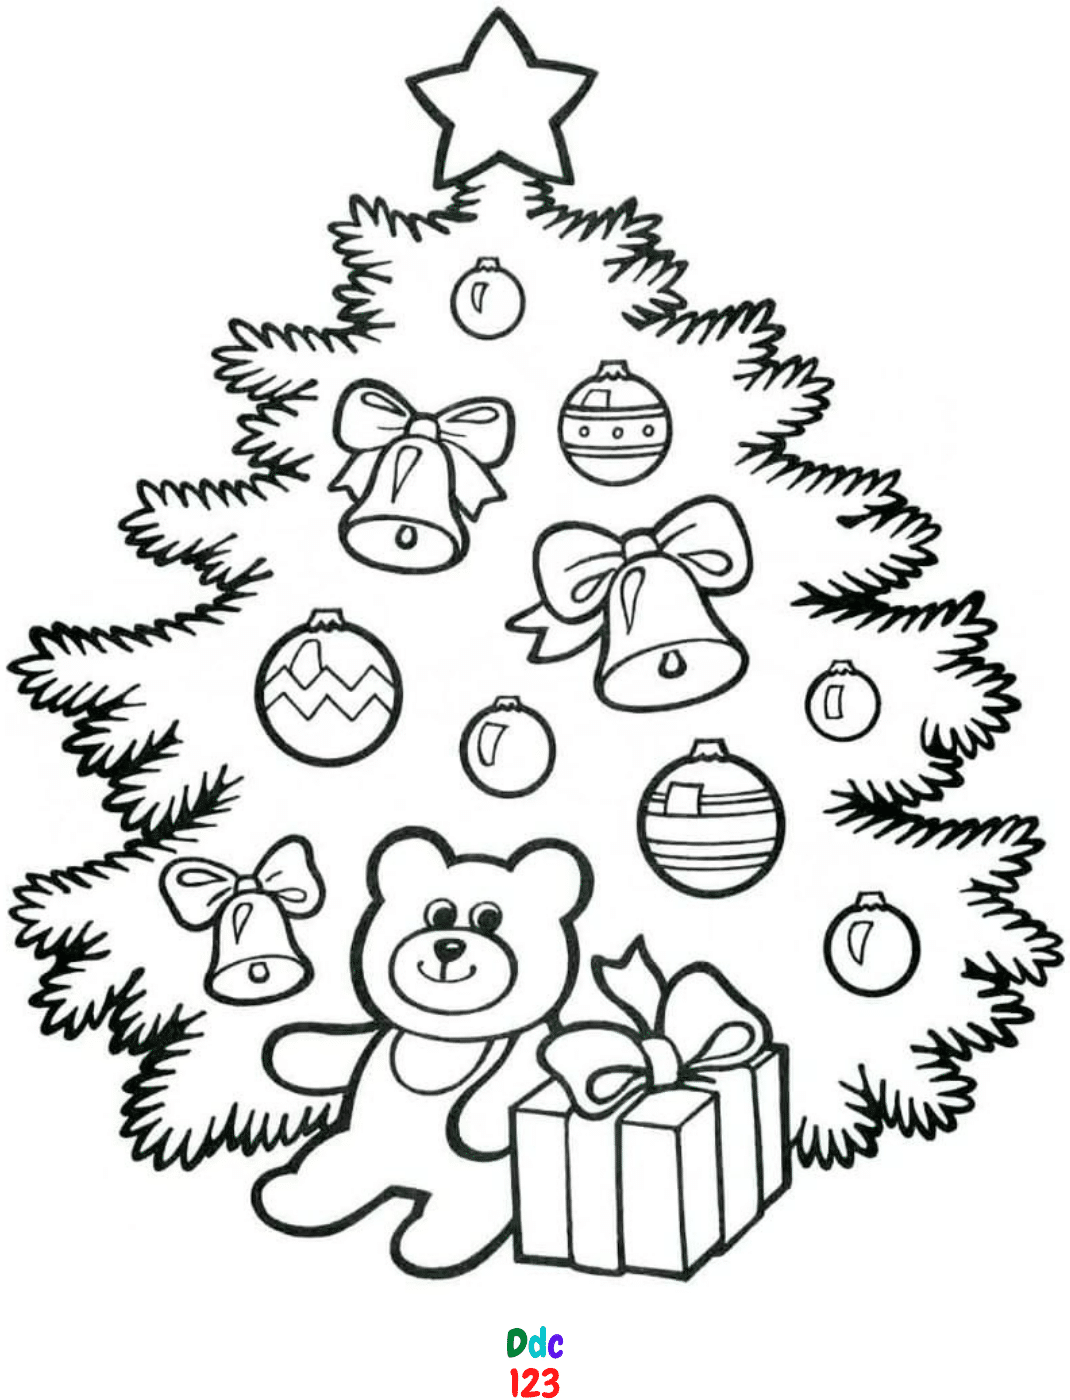 Christmas Tree Coloring Pages for children - DDC123